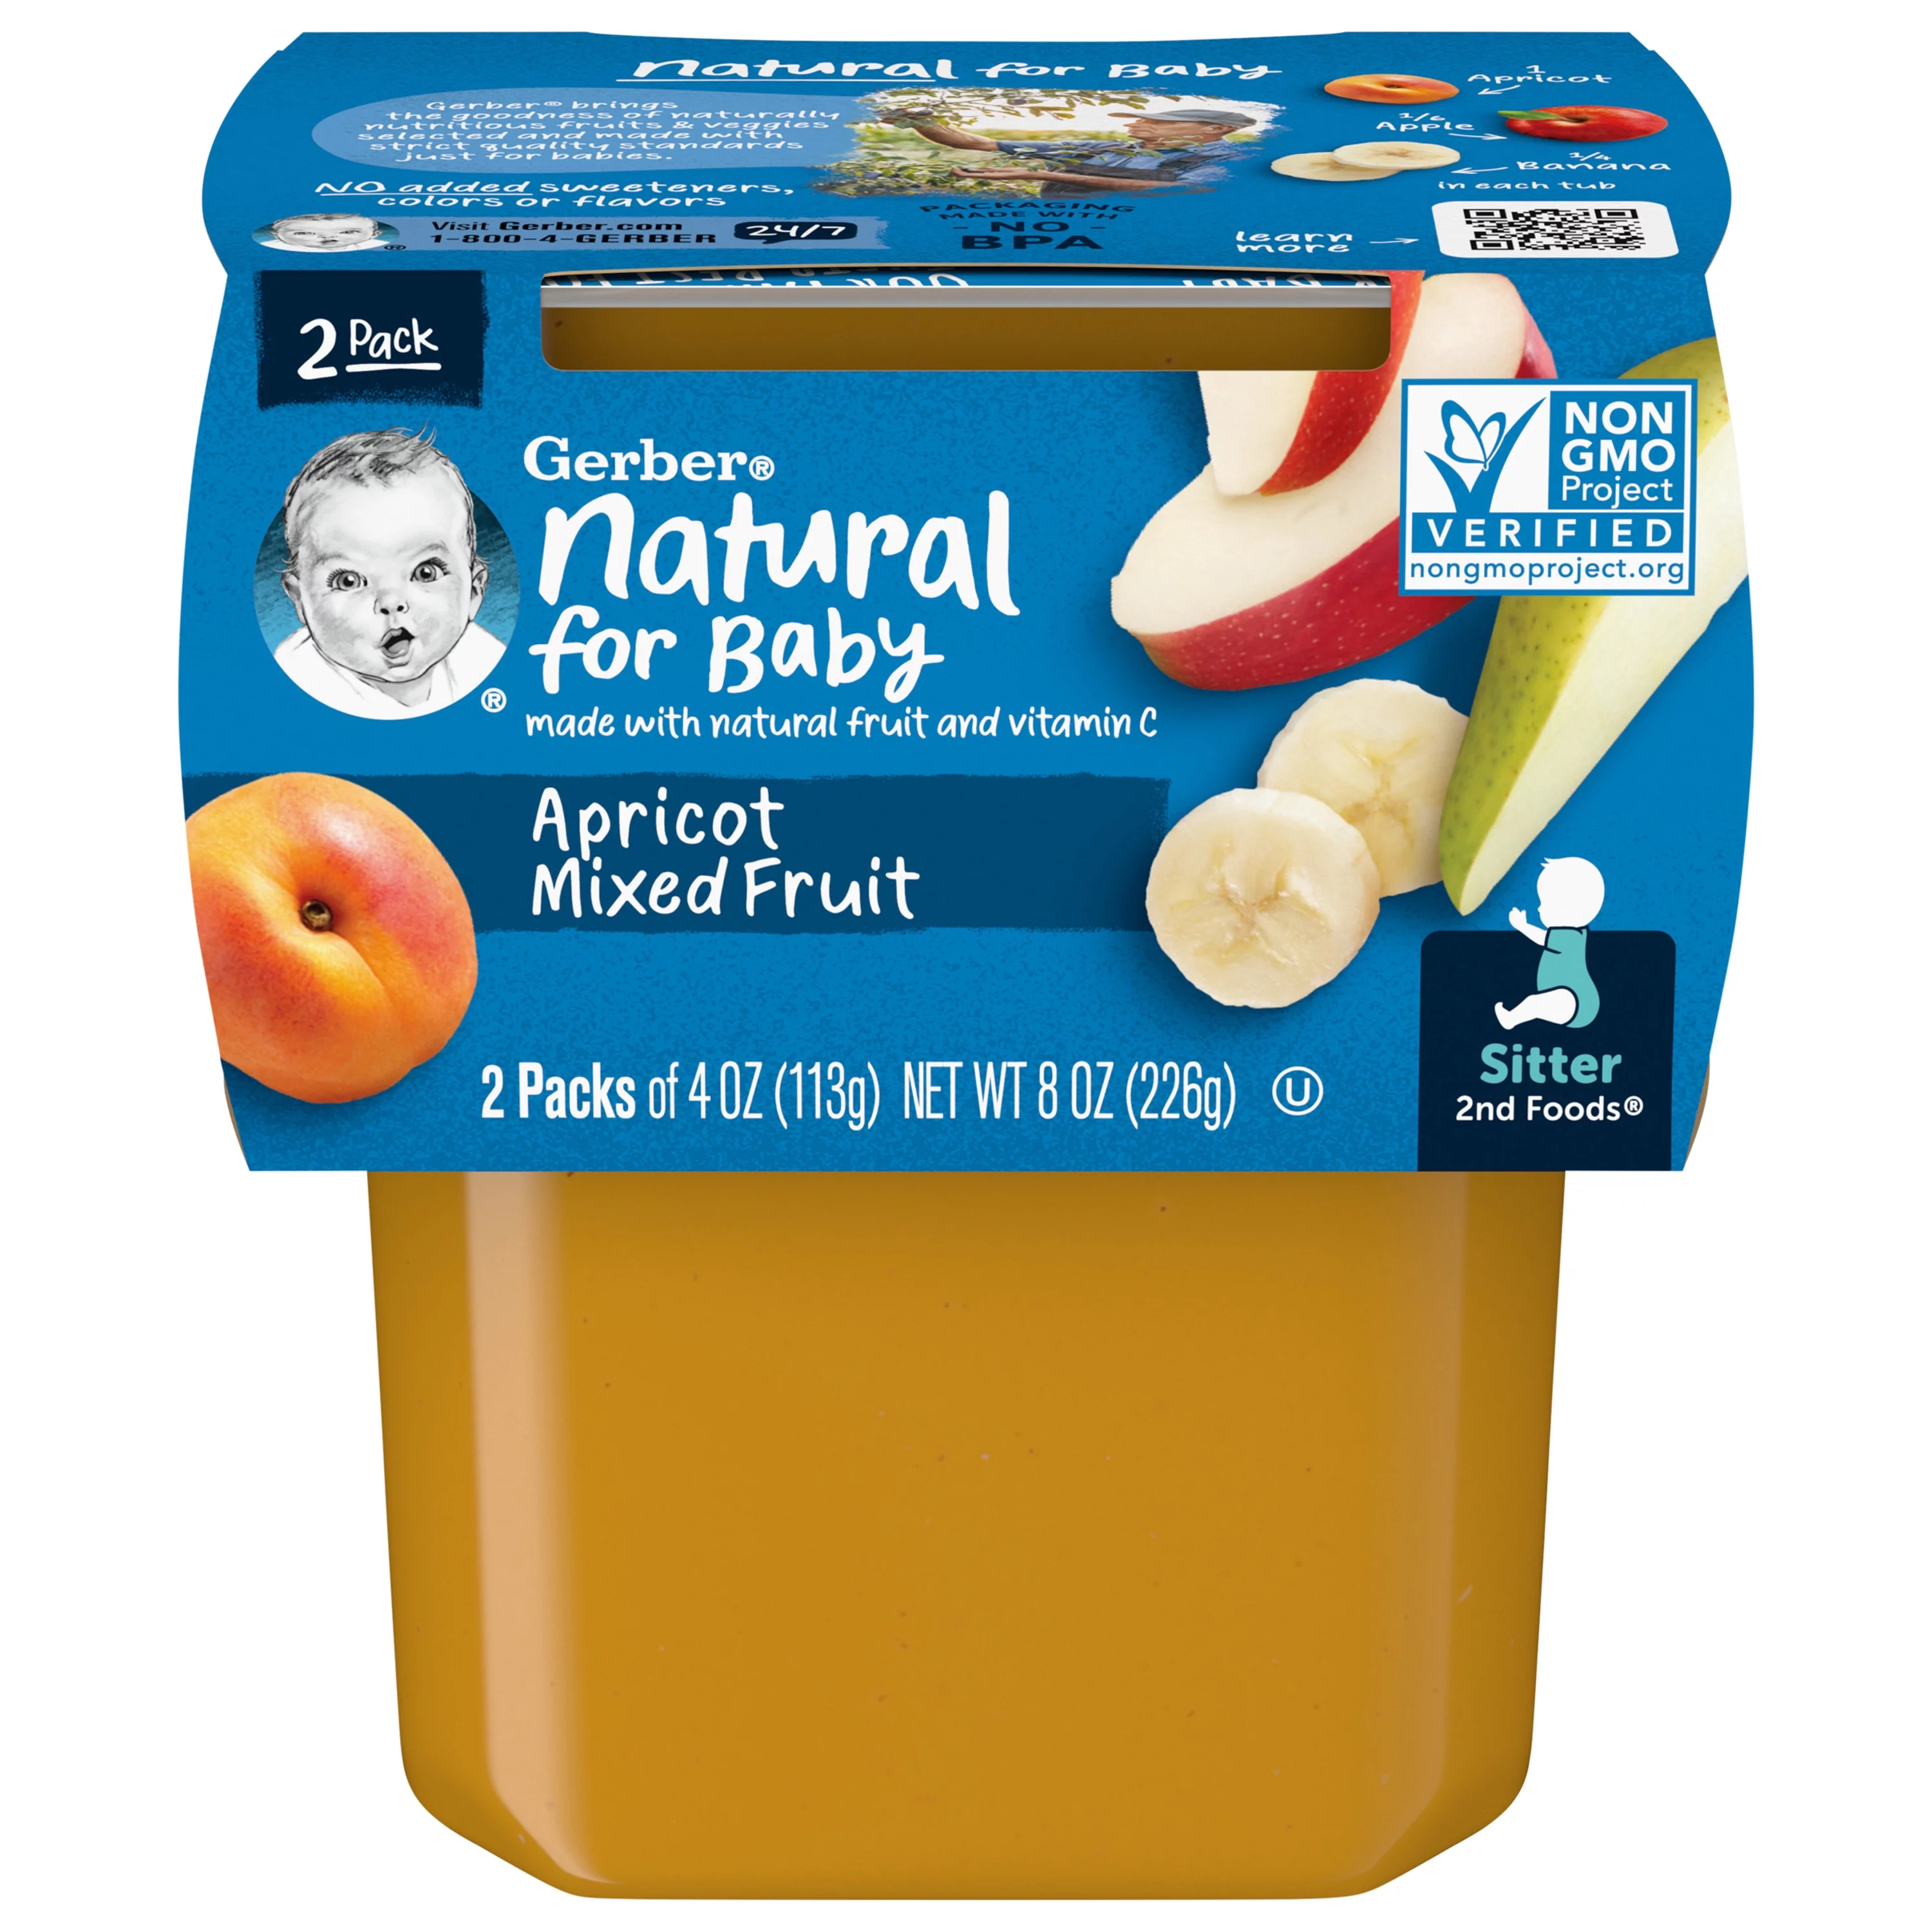 Gerber 2nd Foods Natural for Baby Baby Food, Apricot Mixed Fruit, 4 oz Tubs (16 Pack)